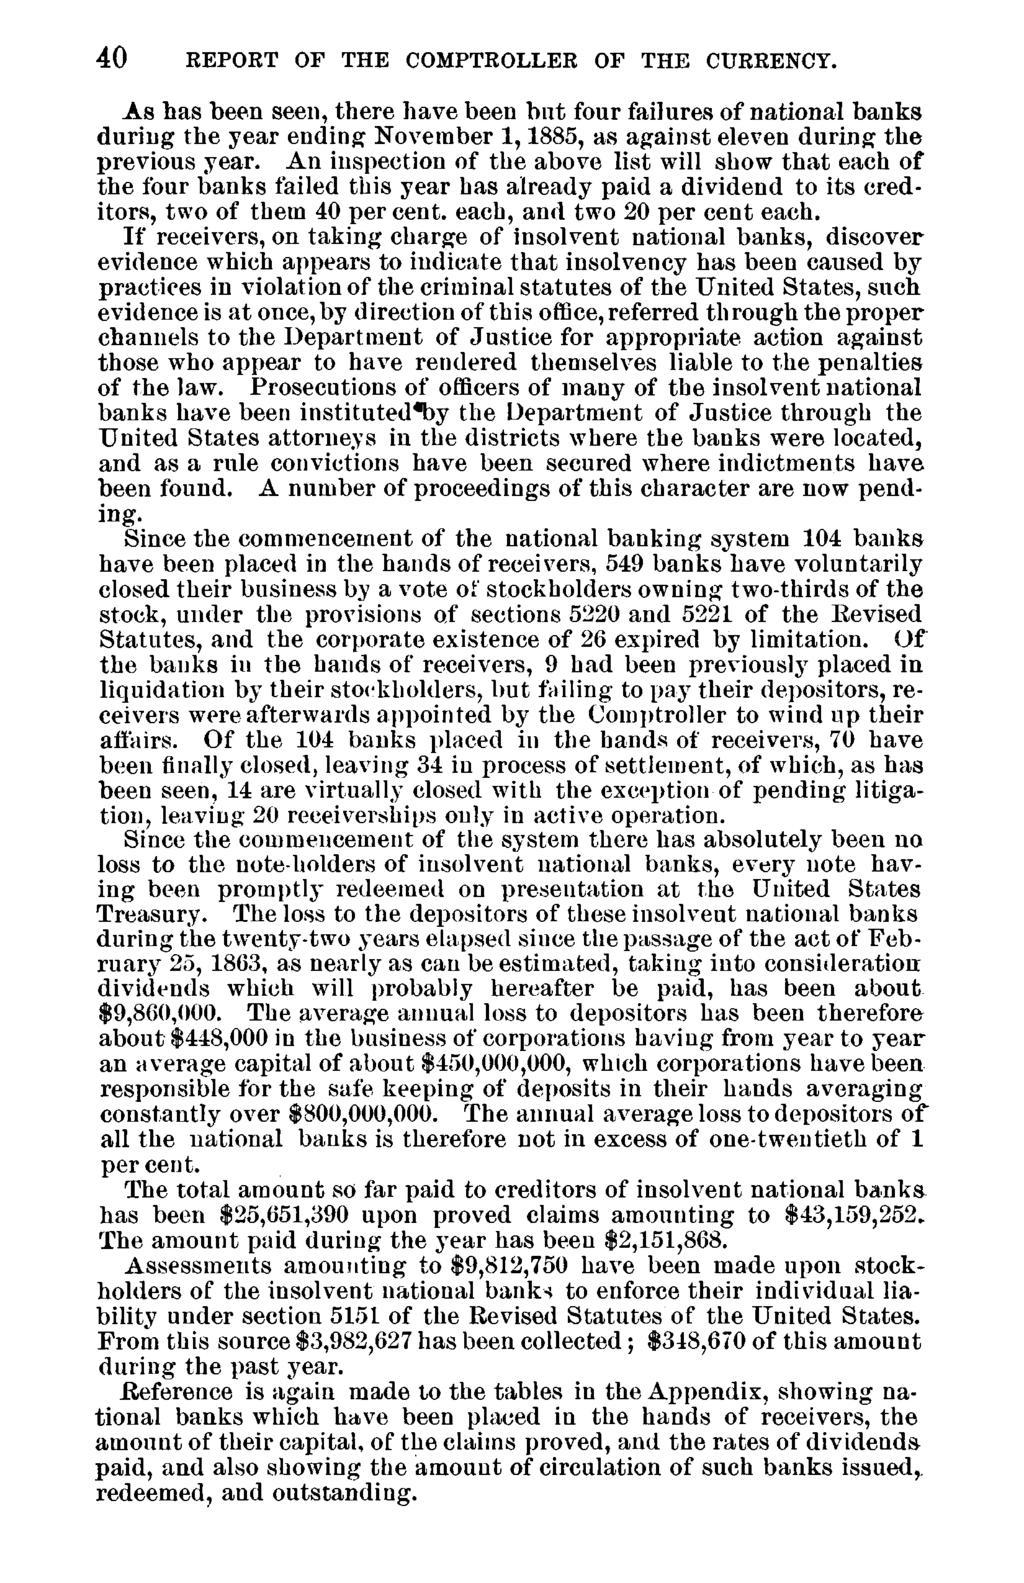 40 REPORT OF THE COMPTROLLER OF THE CURRENCY. As has been seen, there have been but four failures of national banks during the year ending November 1,1885, as against eleven during the previous year.